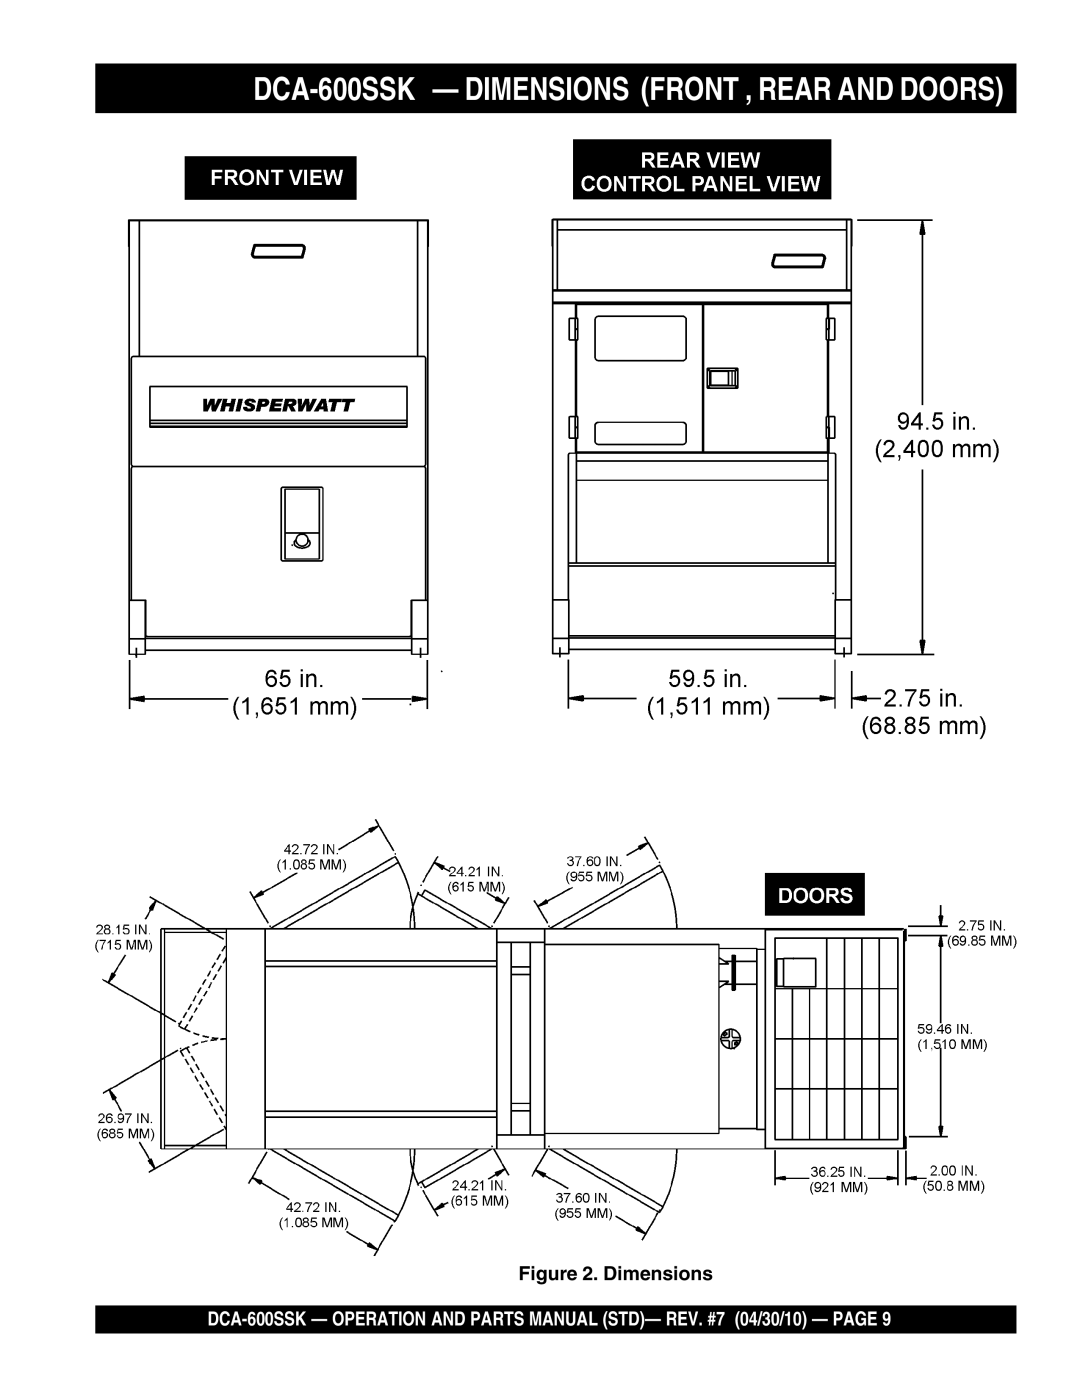 Multiquip operation manual DCA-600SSK - DIMENSIONS FRONT , REAR AND DOORS, Dimensions 